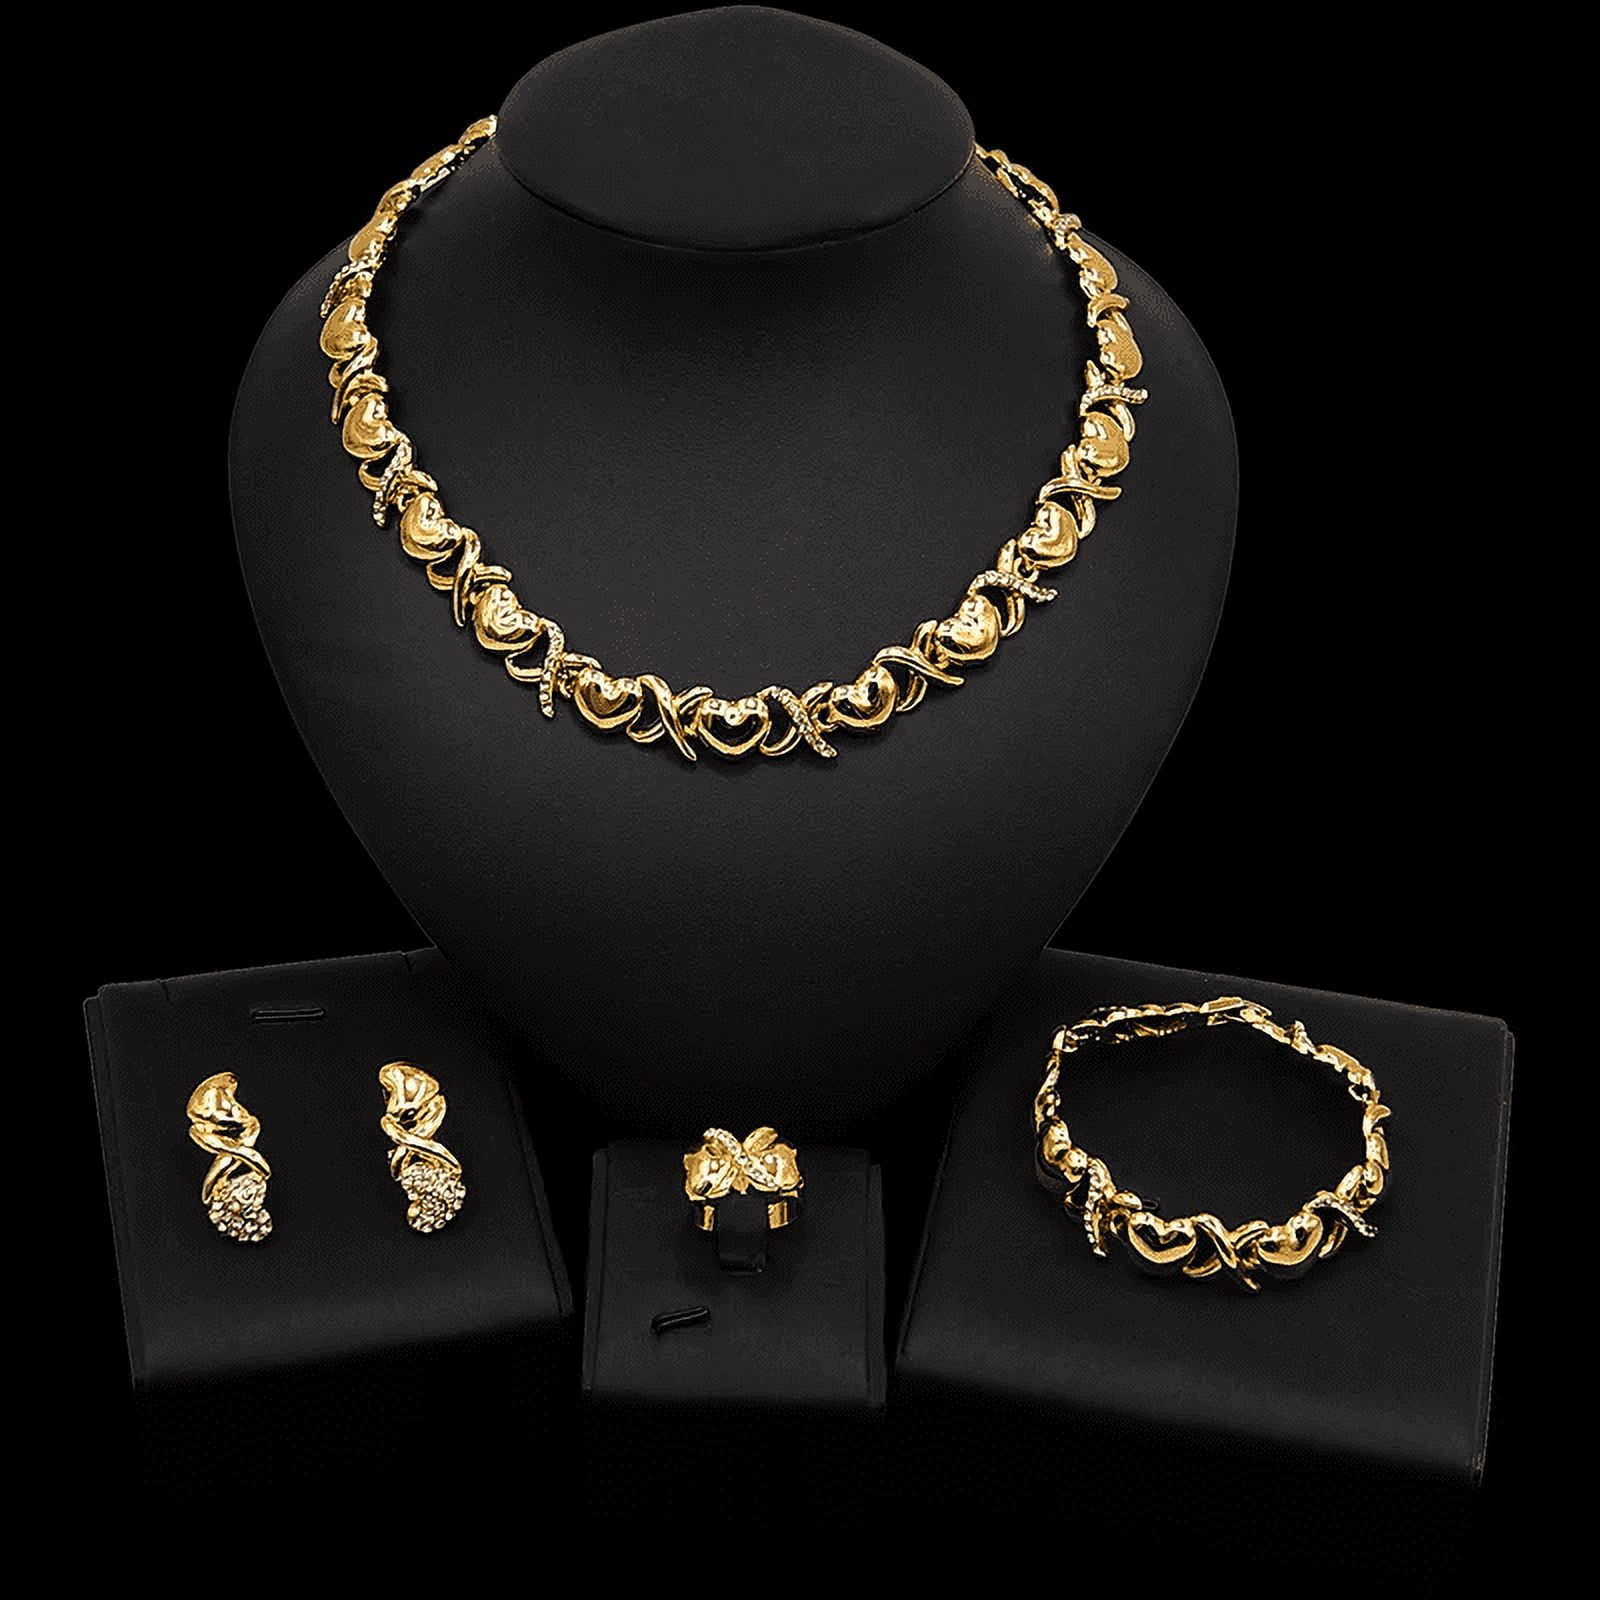 Women s Girls Hugs Kisses XoXo Jewelry Set Real Gold Plated Includes Necklace Bracelet Earring and Ring 76 8703d86b 8880 40f3 a855 7192d8753485.e88fc475ba52bd80b75650d8007d25f3